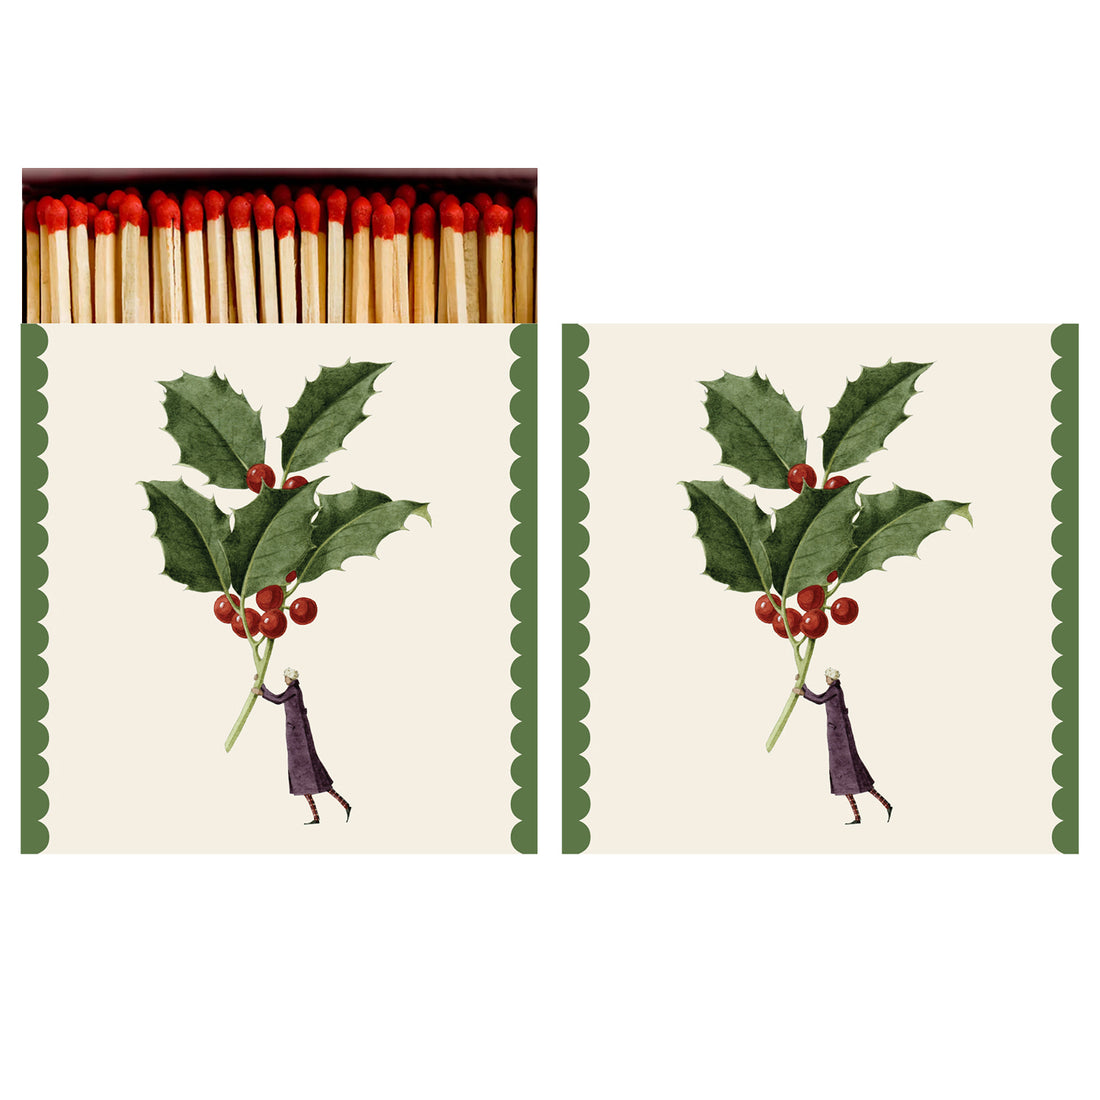 Two identical sides of a square match box, the left of which is open slightly to reveal the matches inside. The artwork on the box depicts a small person holding aloft a gigantic sprig of green holly with red berries on a cream background, with a green scalloped accents along the left and right sides.